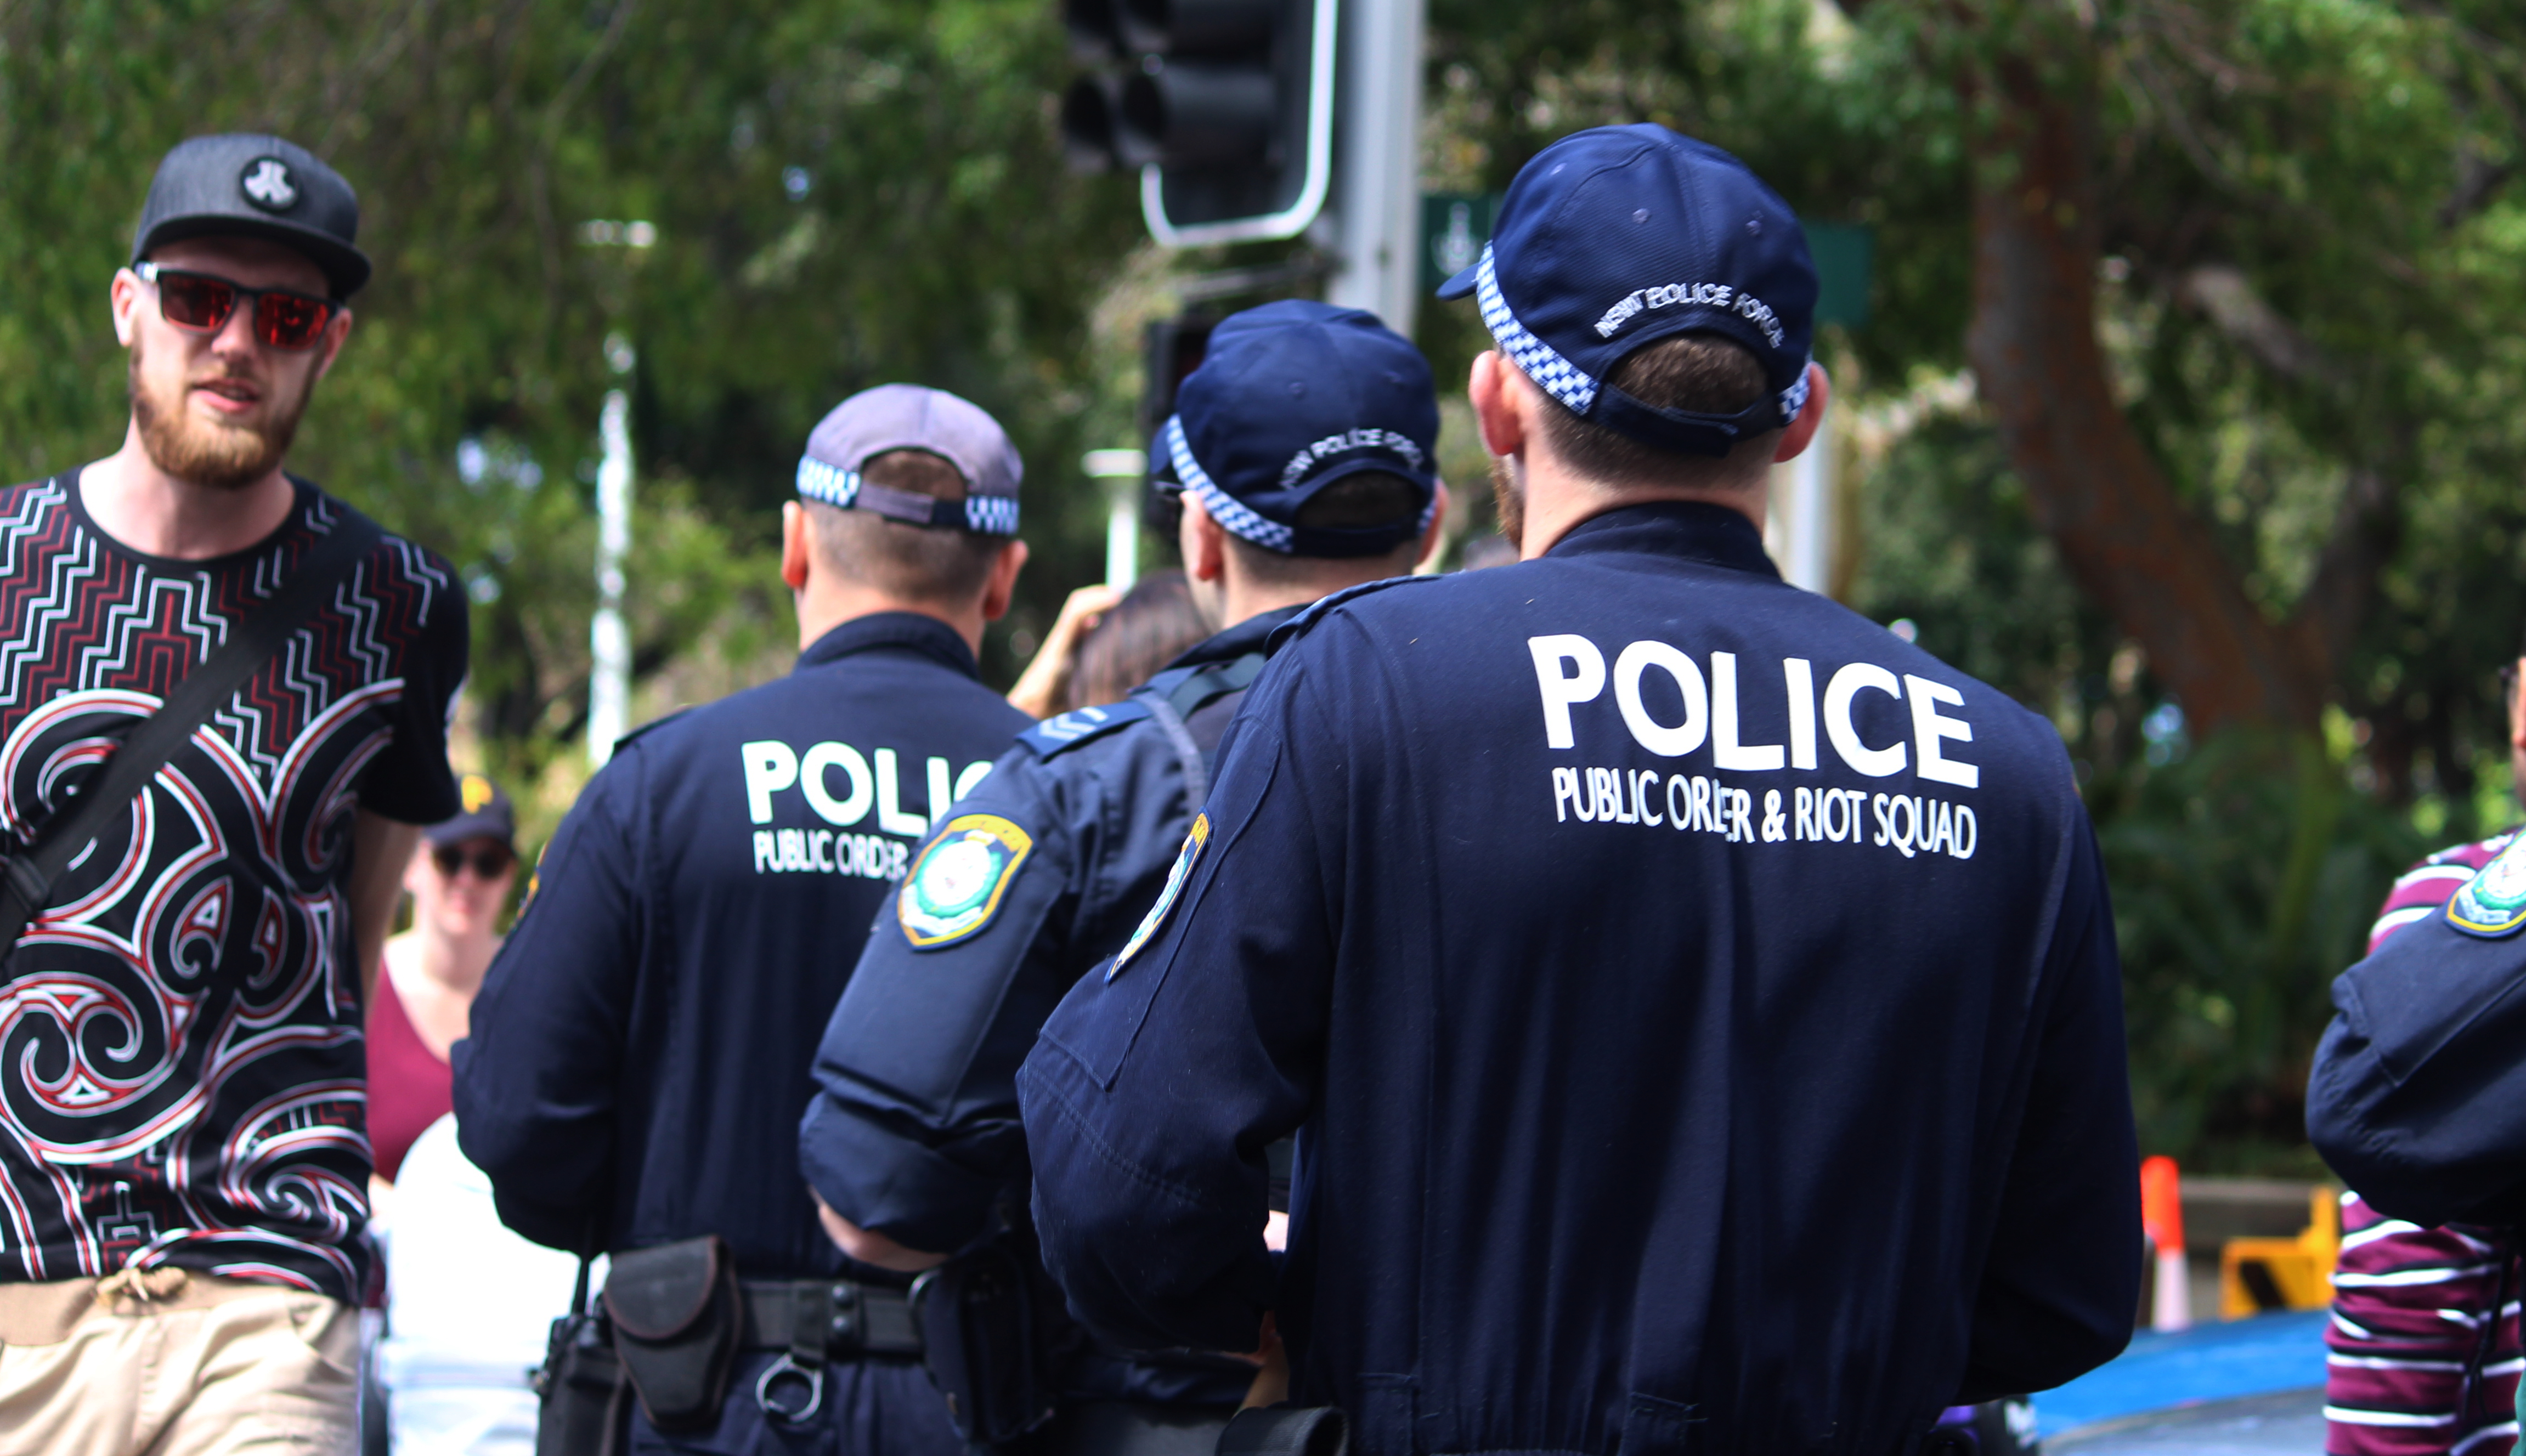 NSW riot squad police officers walking